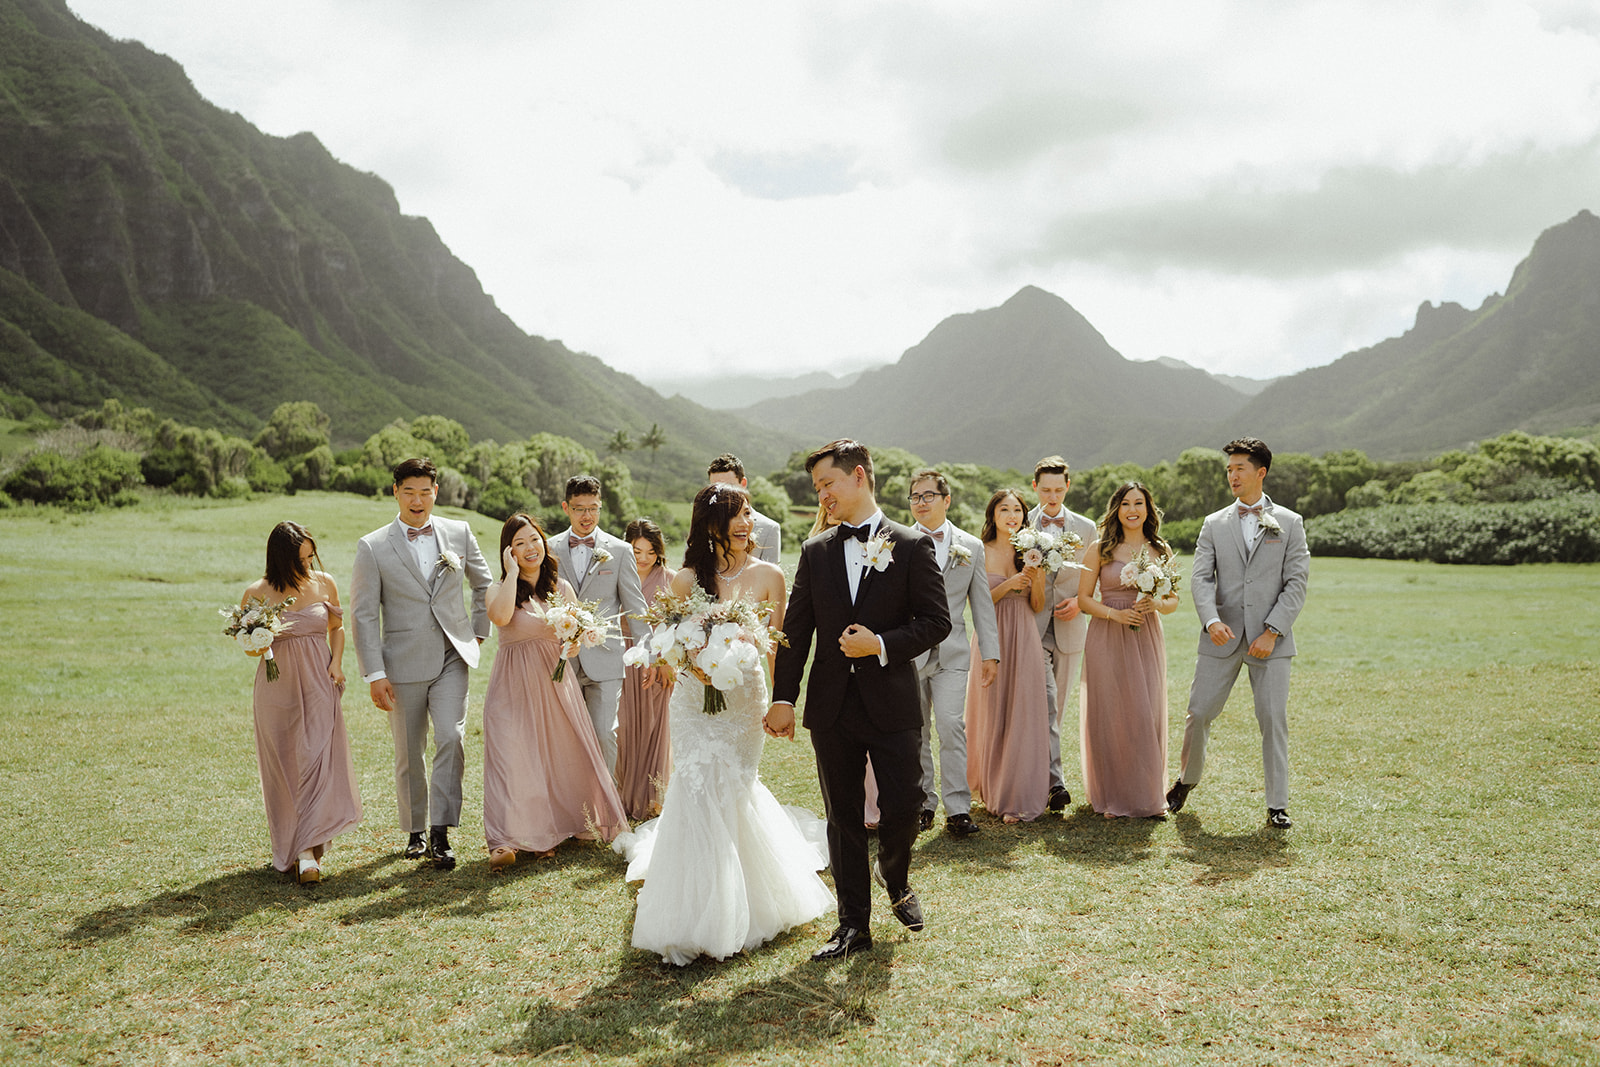 Wedding Party in iconic Jurassic Park movie location